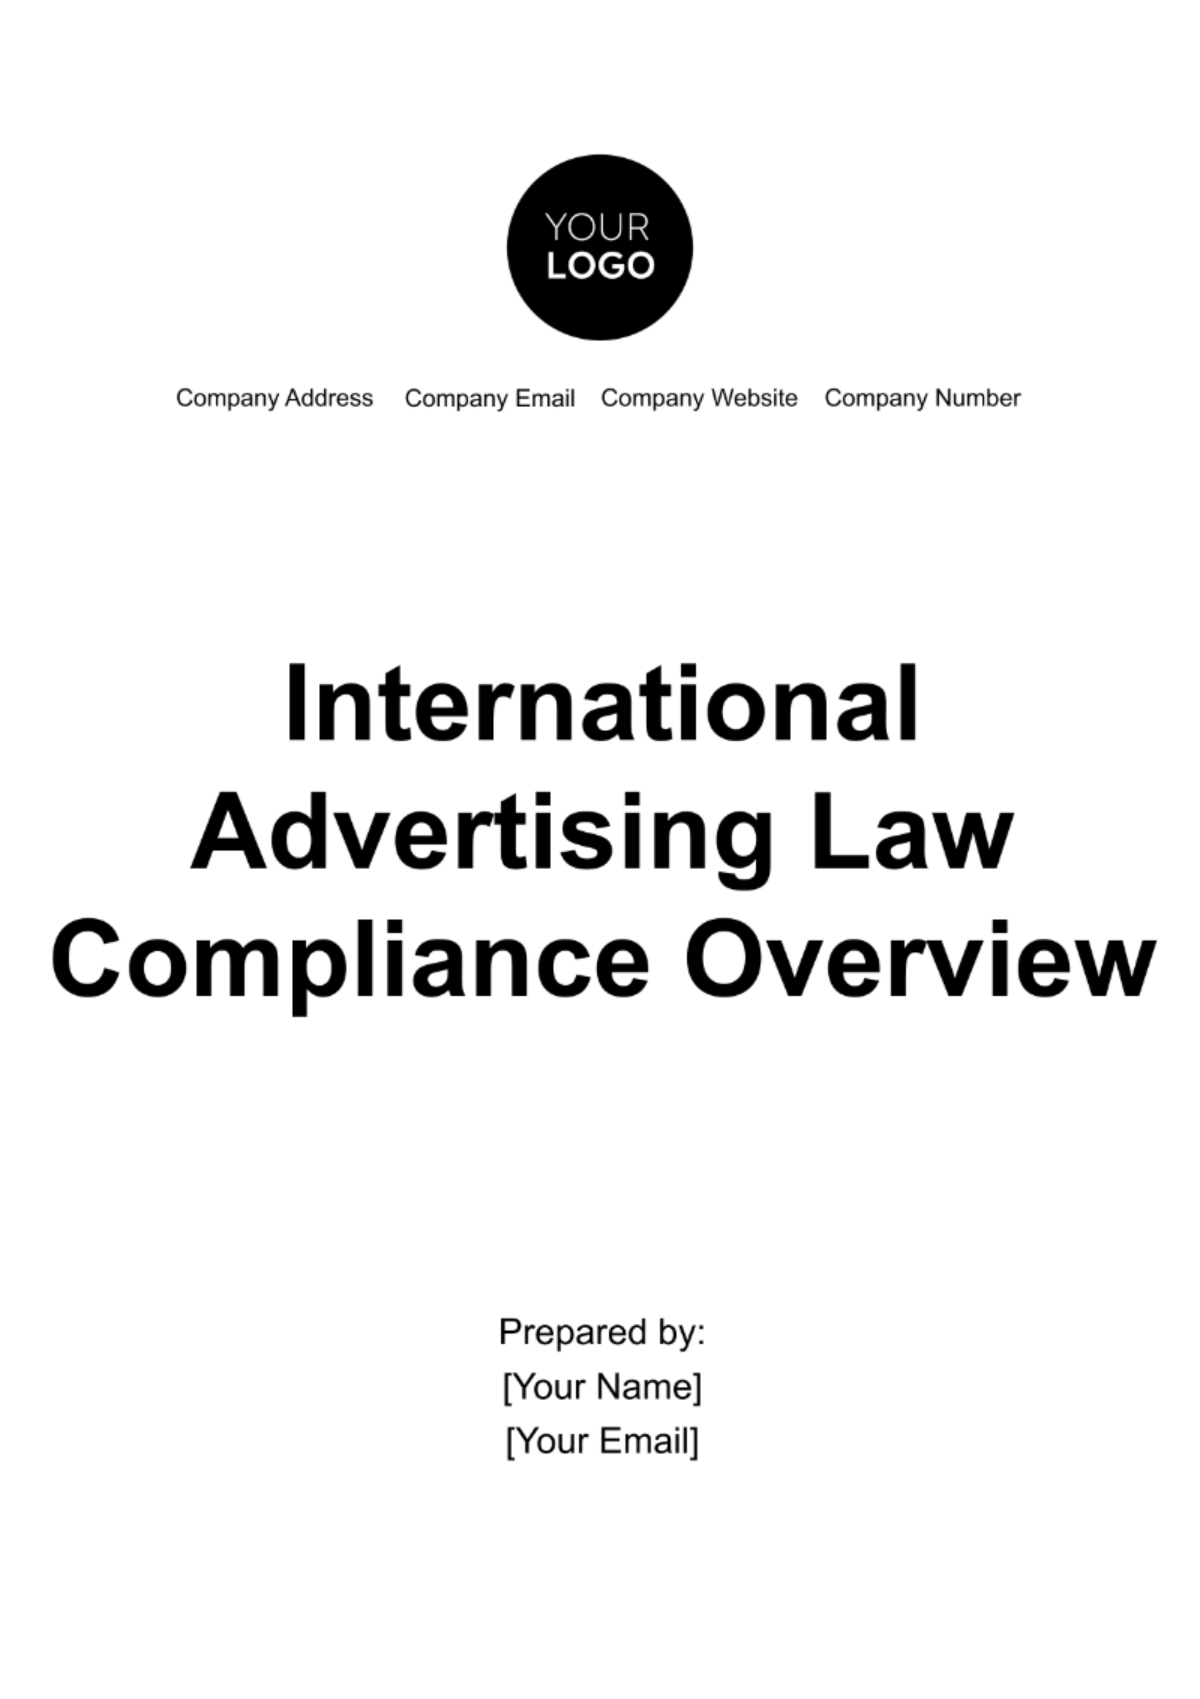 International Advertising Law Compliance Overview Template